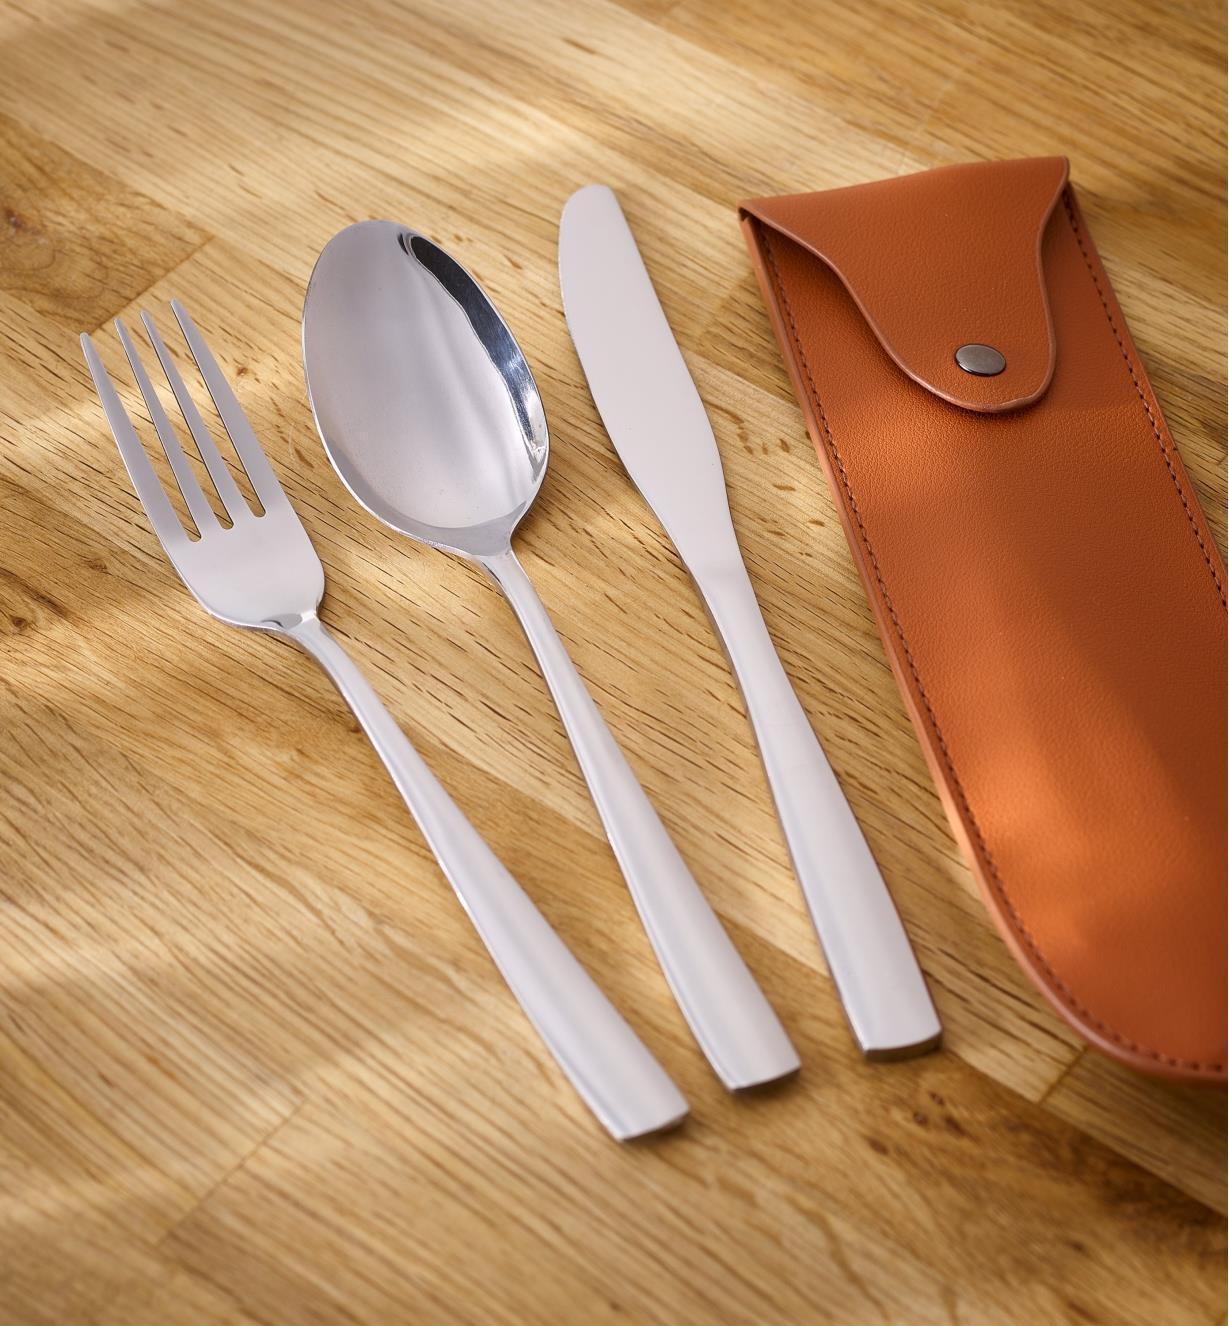 The Portable Cutlery Set – a fork, spoon, knife and simulated leather carrying sheath – lie on a countertop